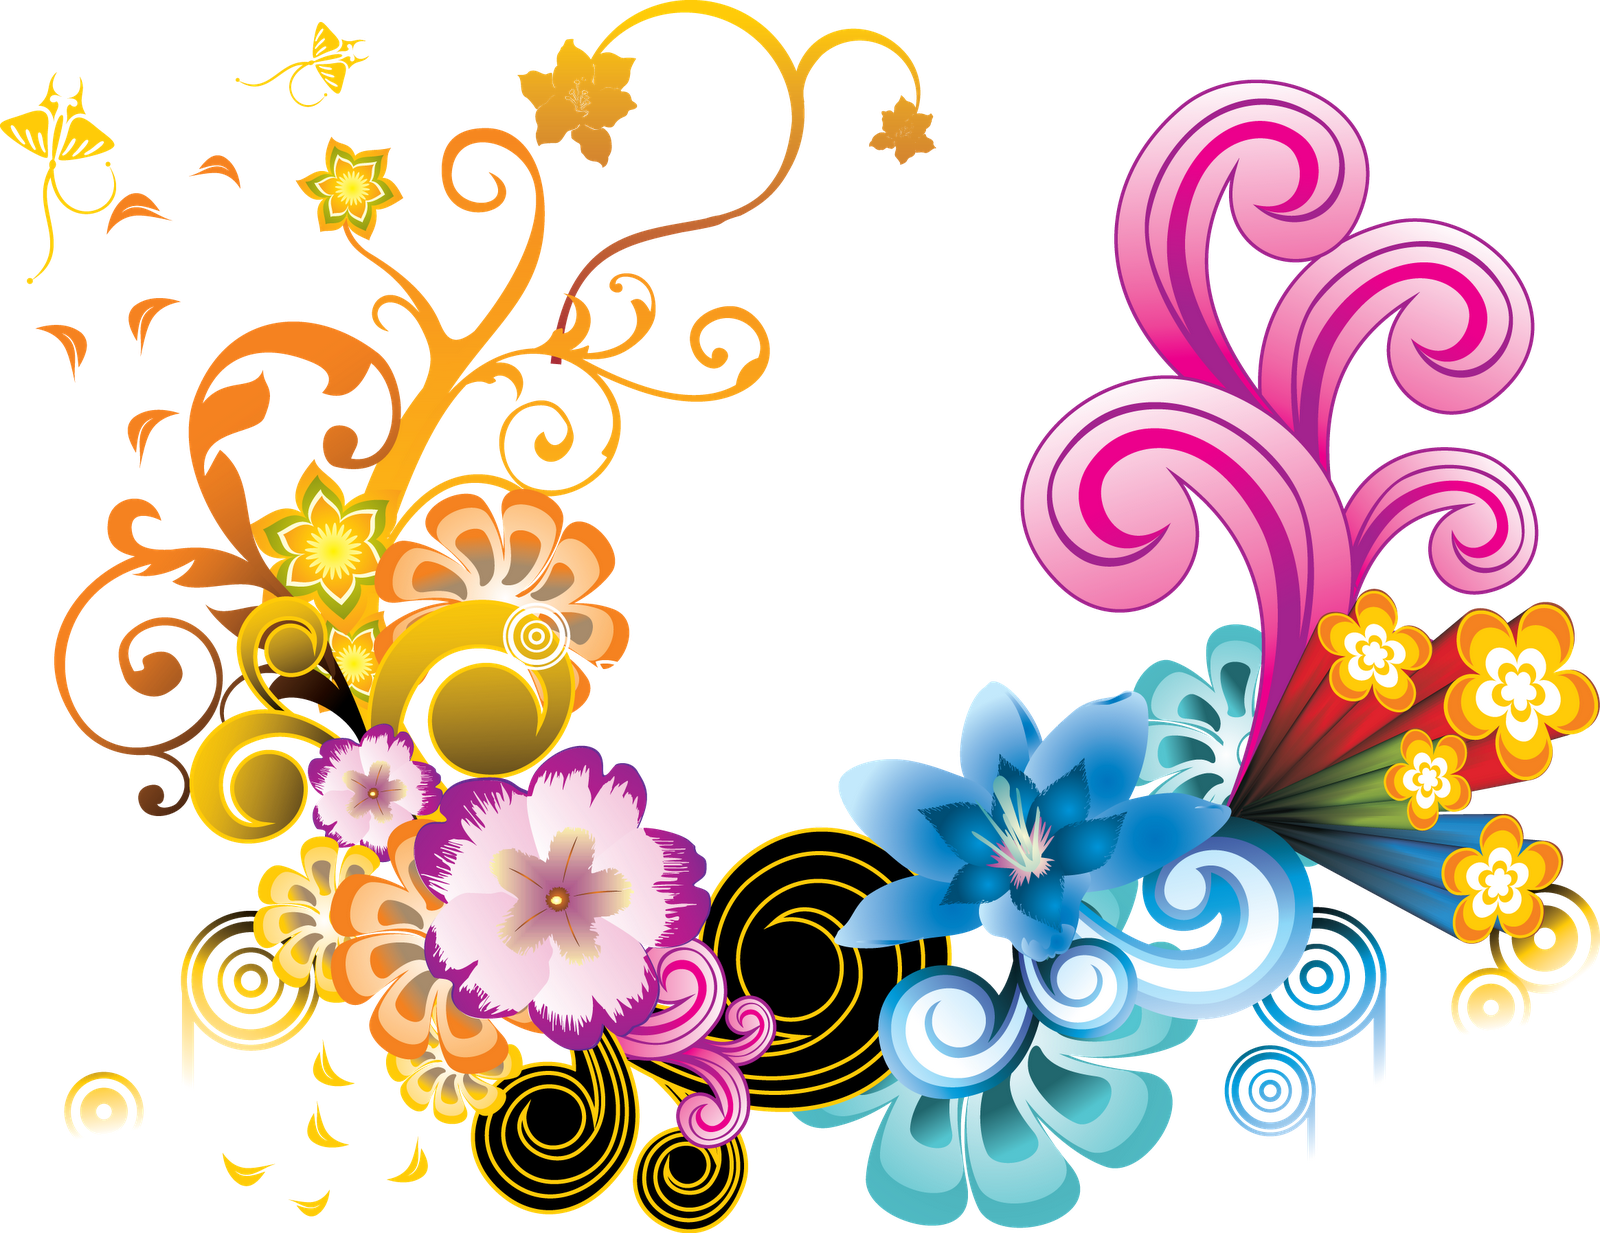 Vector Images For Photoshop Download - Colorful Swirl Designs Png (1600x1233)